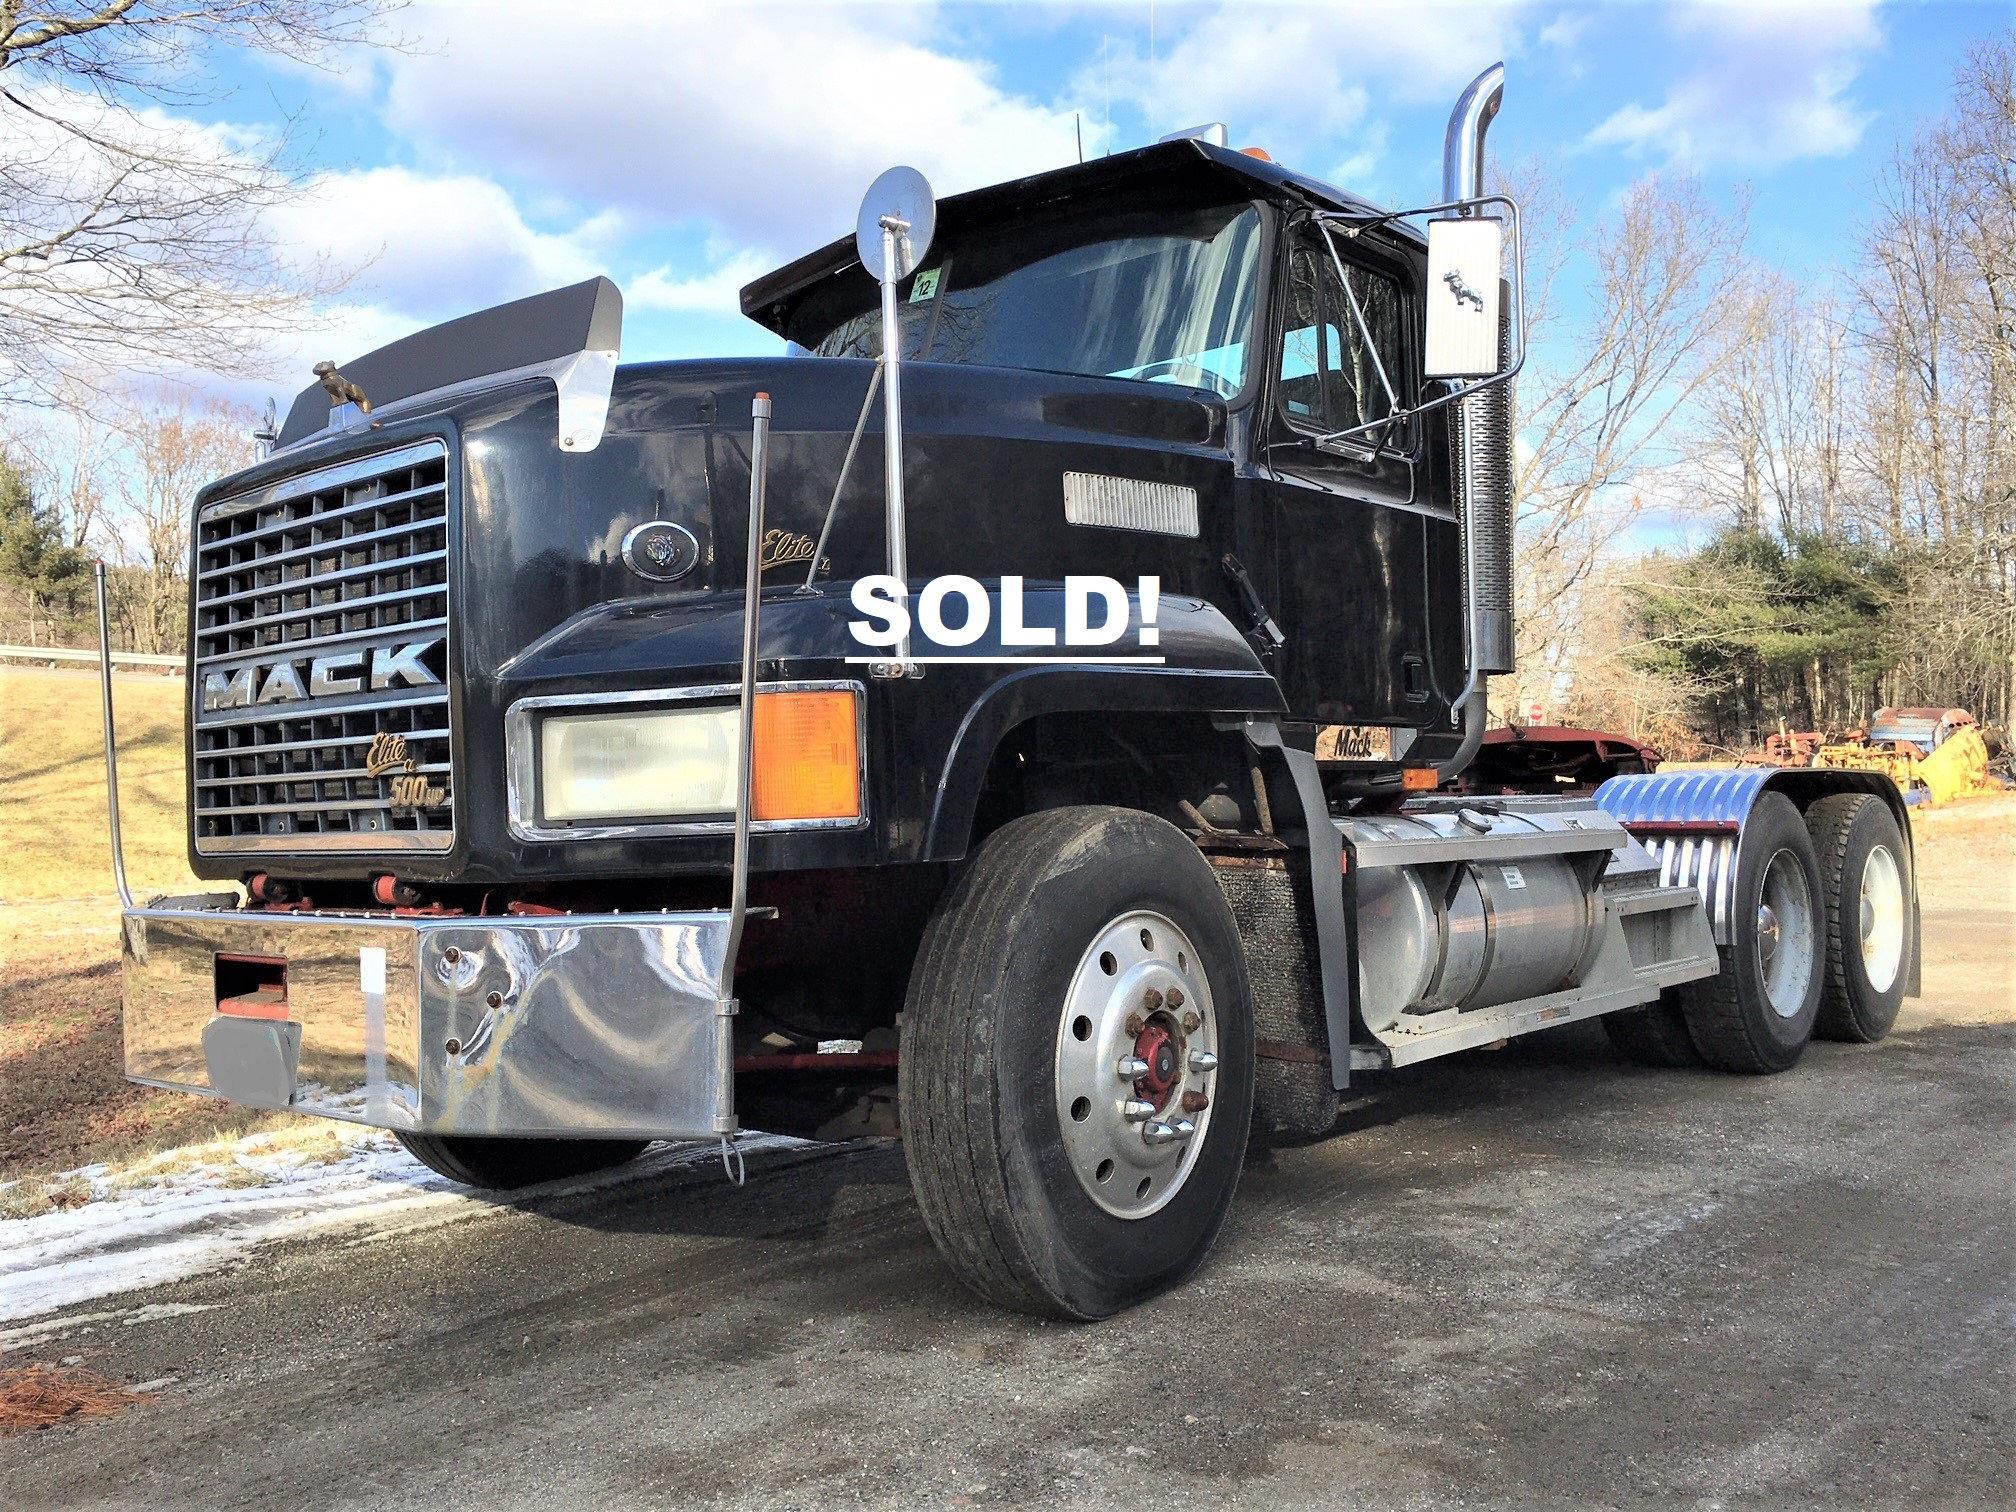 Mack CL713 Semi Tractor. 1999 Mack Elite day cab conventional with a E9-500 V8 diesel engine and 463015 miles. Maxitorque extended range 12 speed splitter transmission. Rear axle power divider. 12k front suspension. Hendrickson air ride rear suspension with 44k lbs. rears and 4.42 ratio.  187" inch wheelbase. Double frame. PTO and dual wetline setup. Engine break. Air ride drivers seat. Heat and A/C.